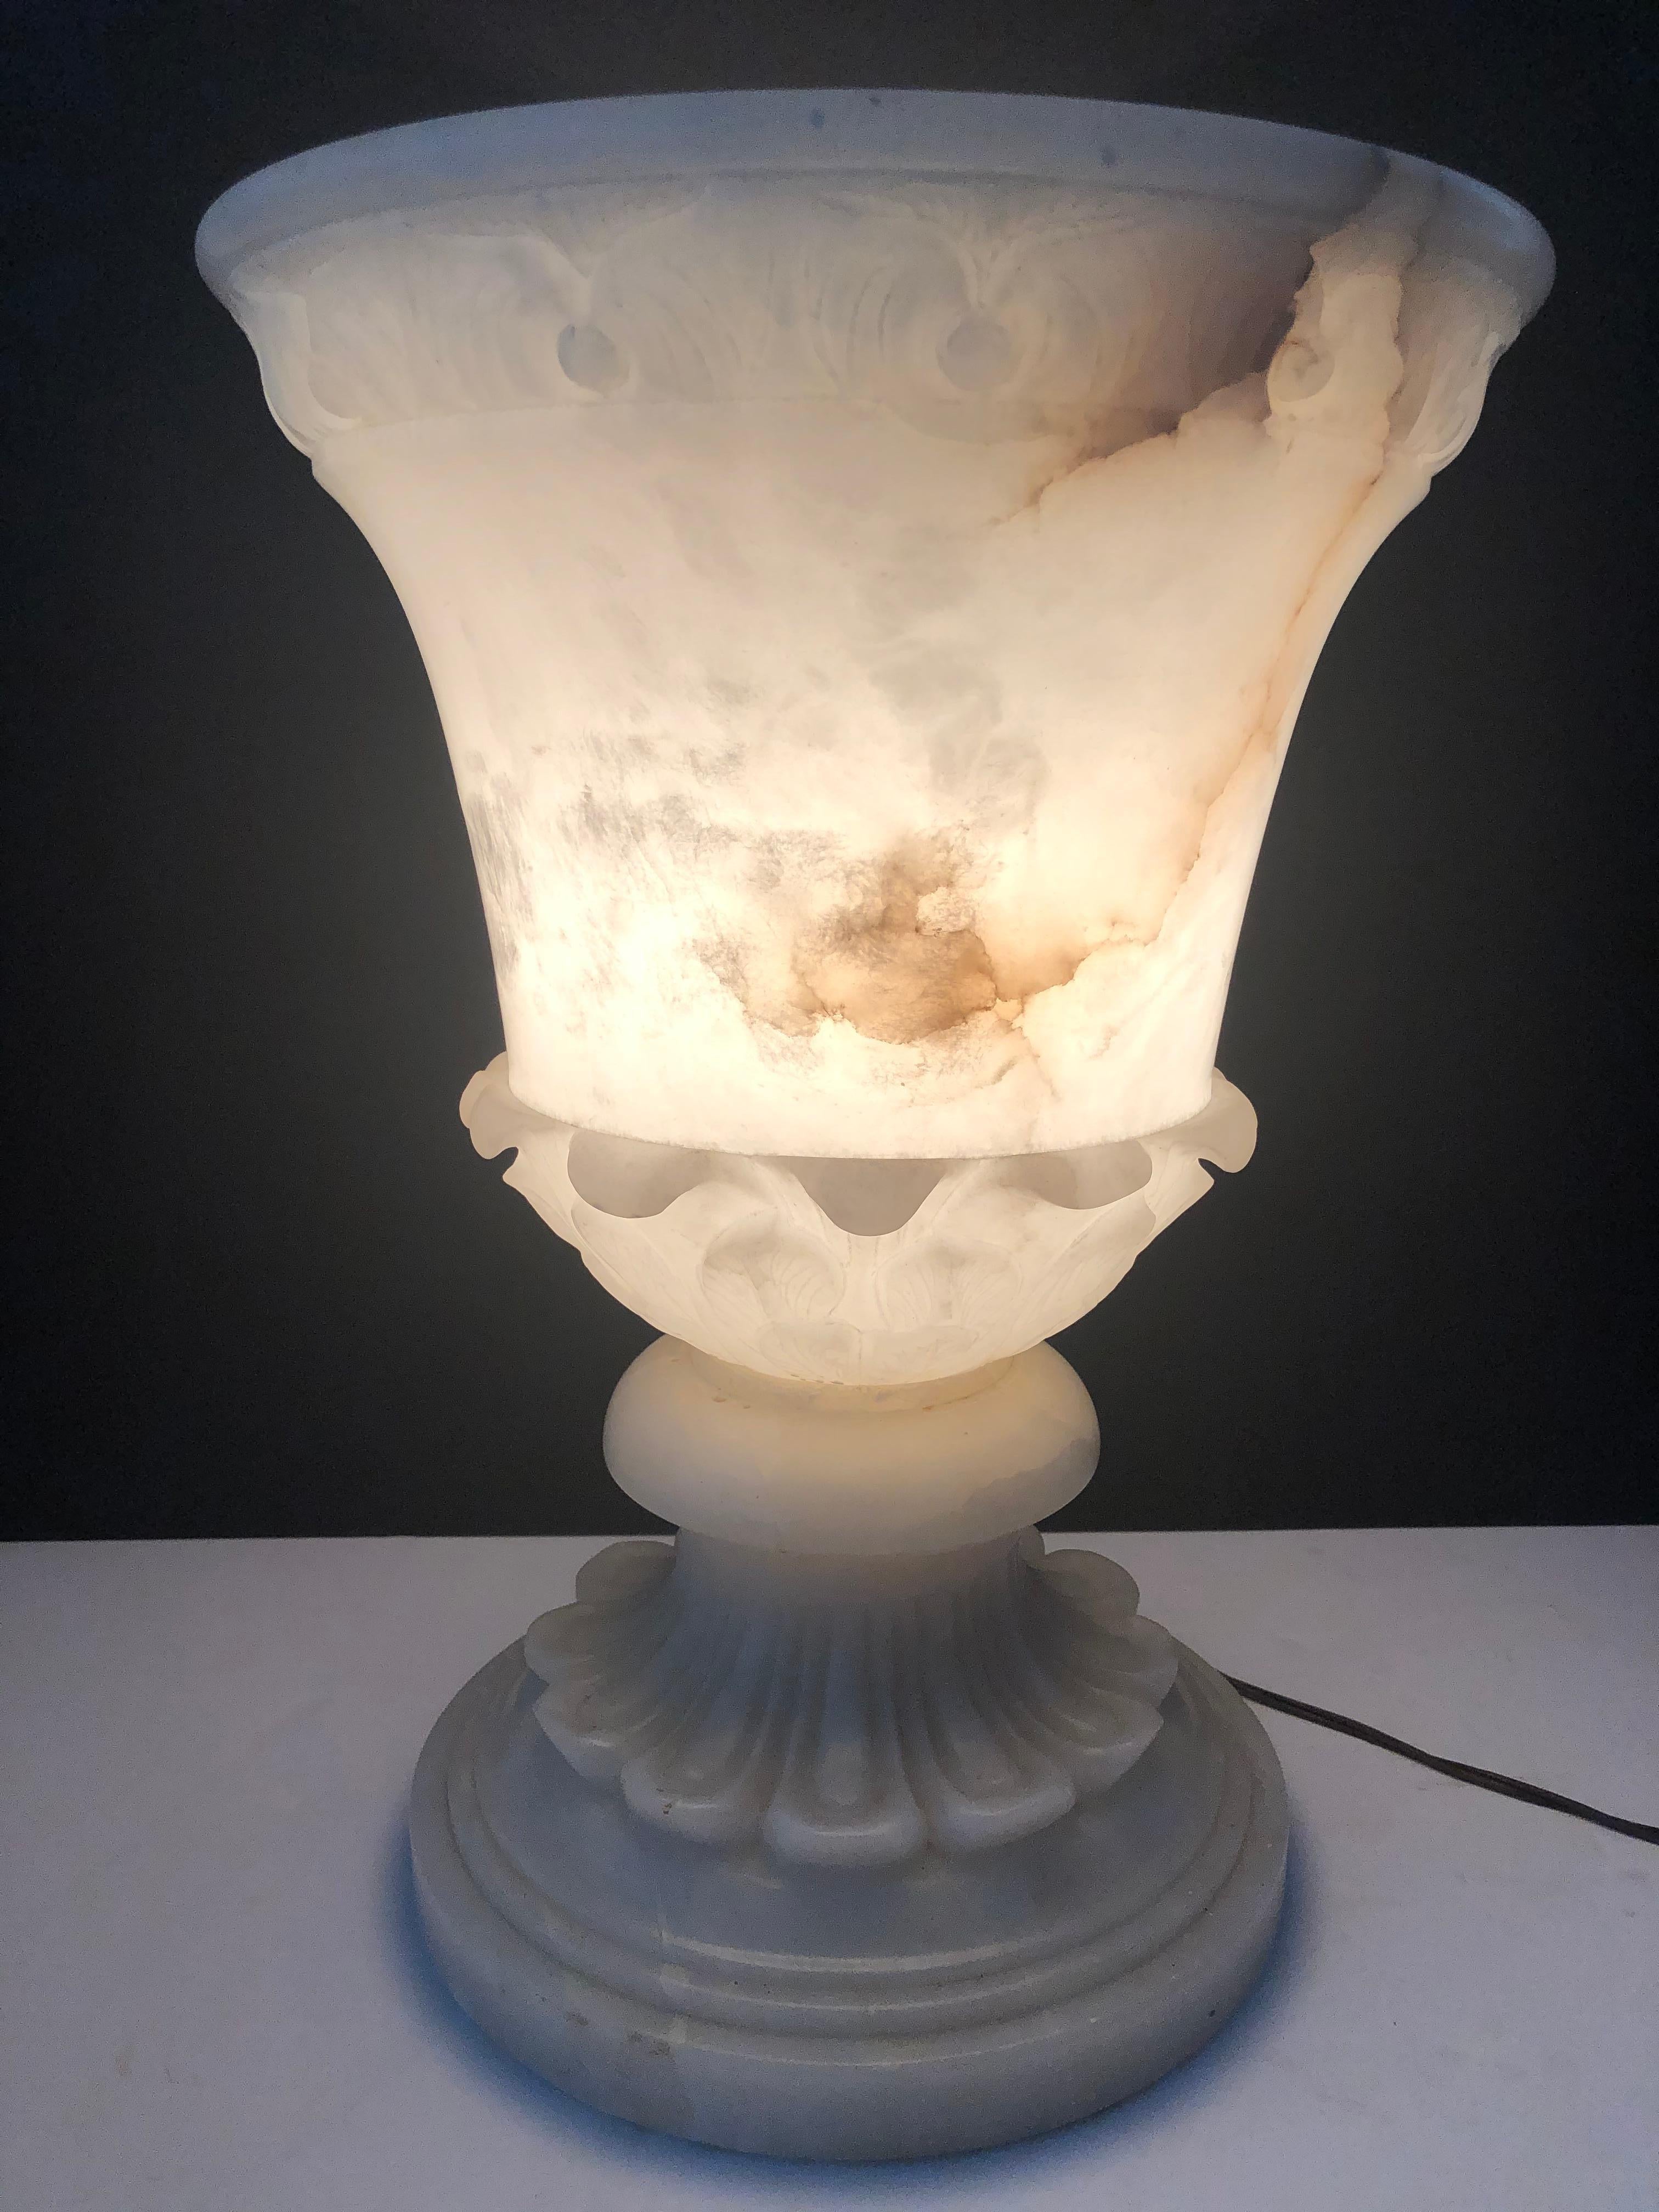 A stunning alabaster torchiere style table lamp. Made in Italy, this torchiere is of a larger size than most. It has carved detail throughout. When lit, its veining in the alabaster shows and it provides a soft ambient light. The dimmer switch